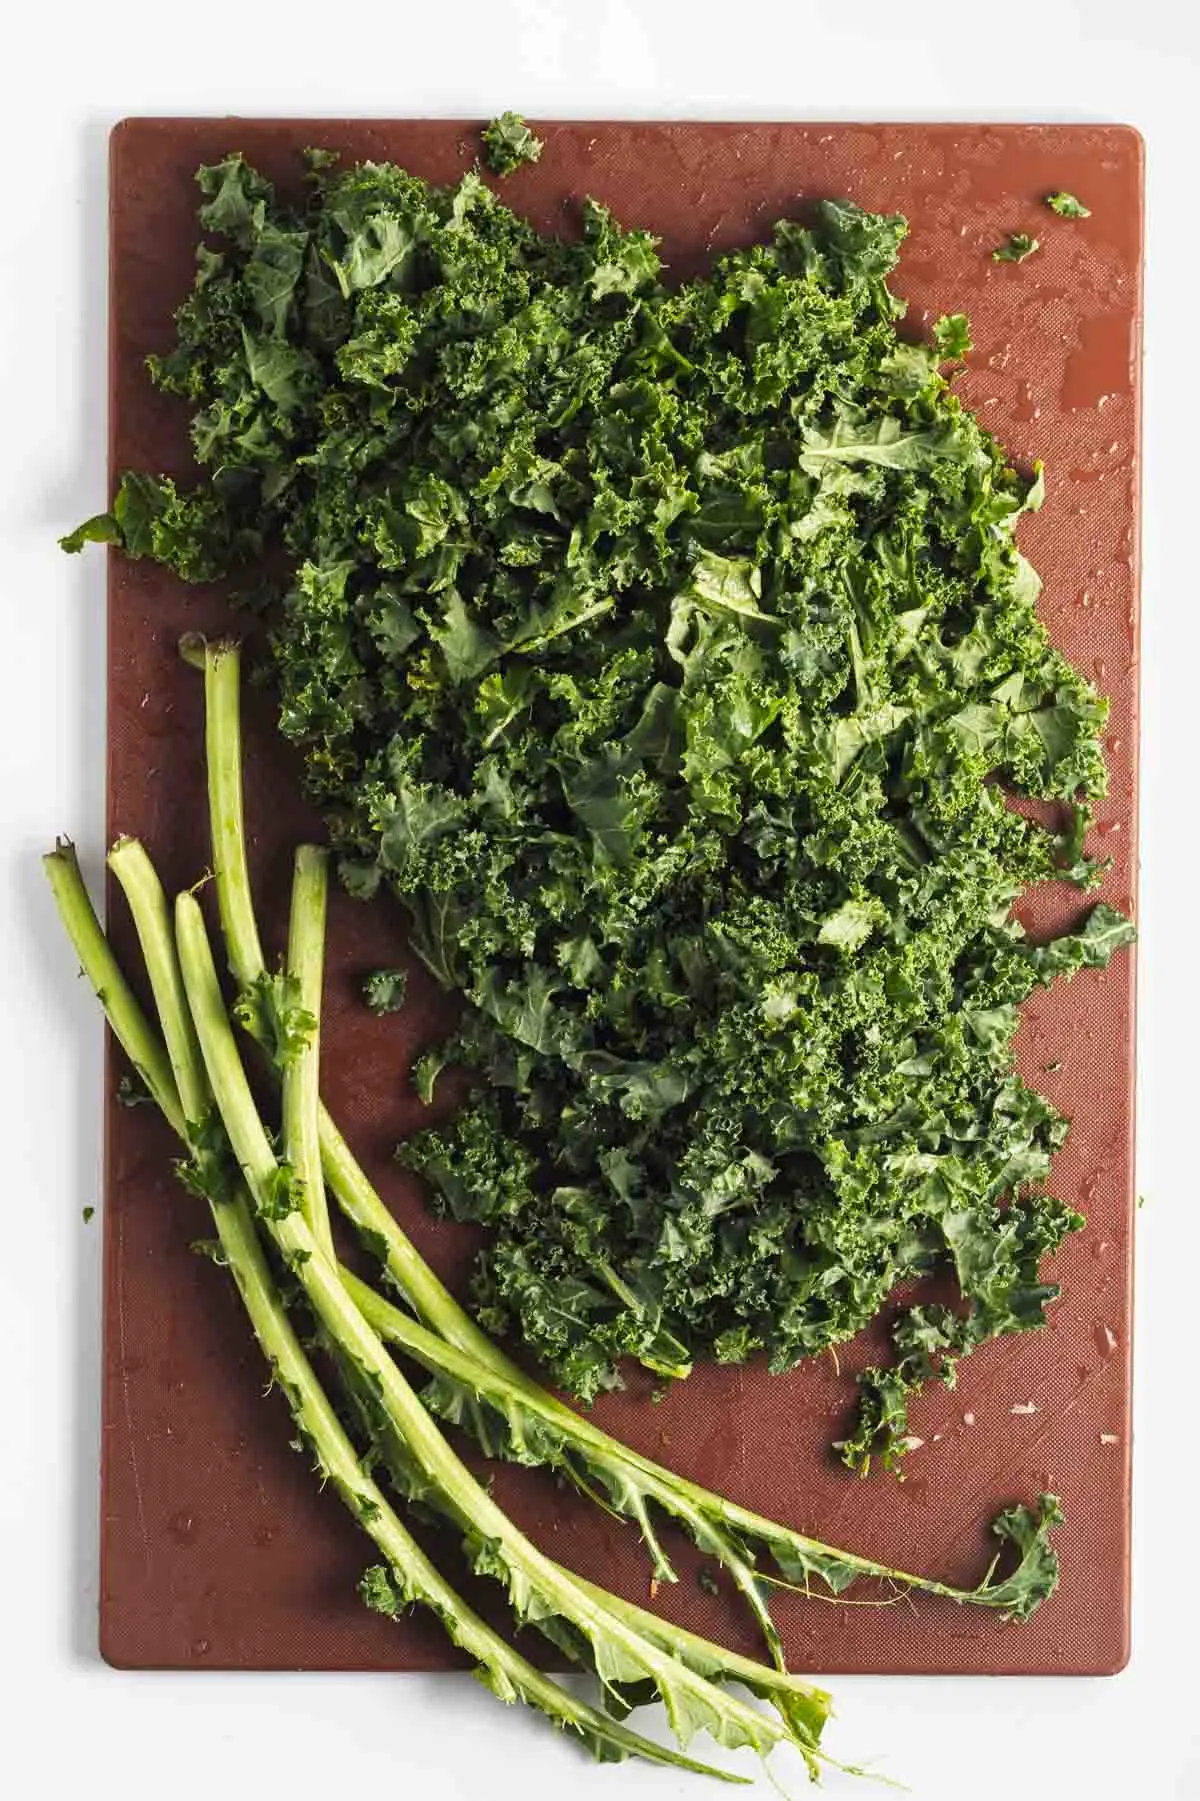 Kale leaves removed from the ribs and cut into bite-size pieces